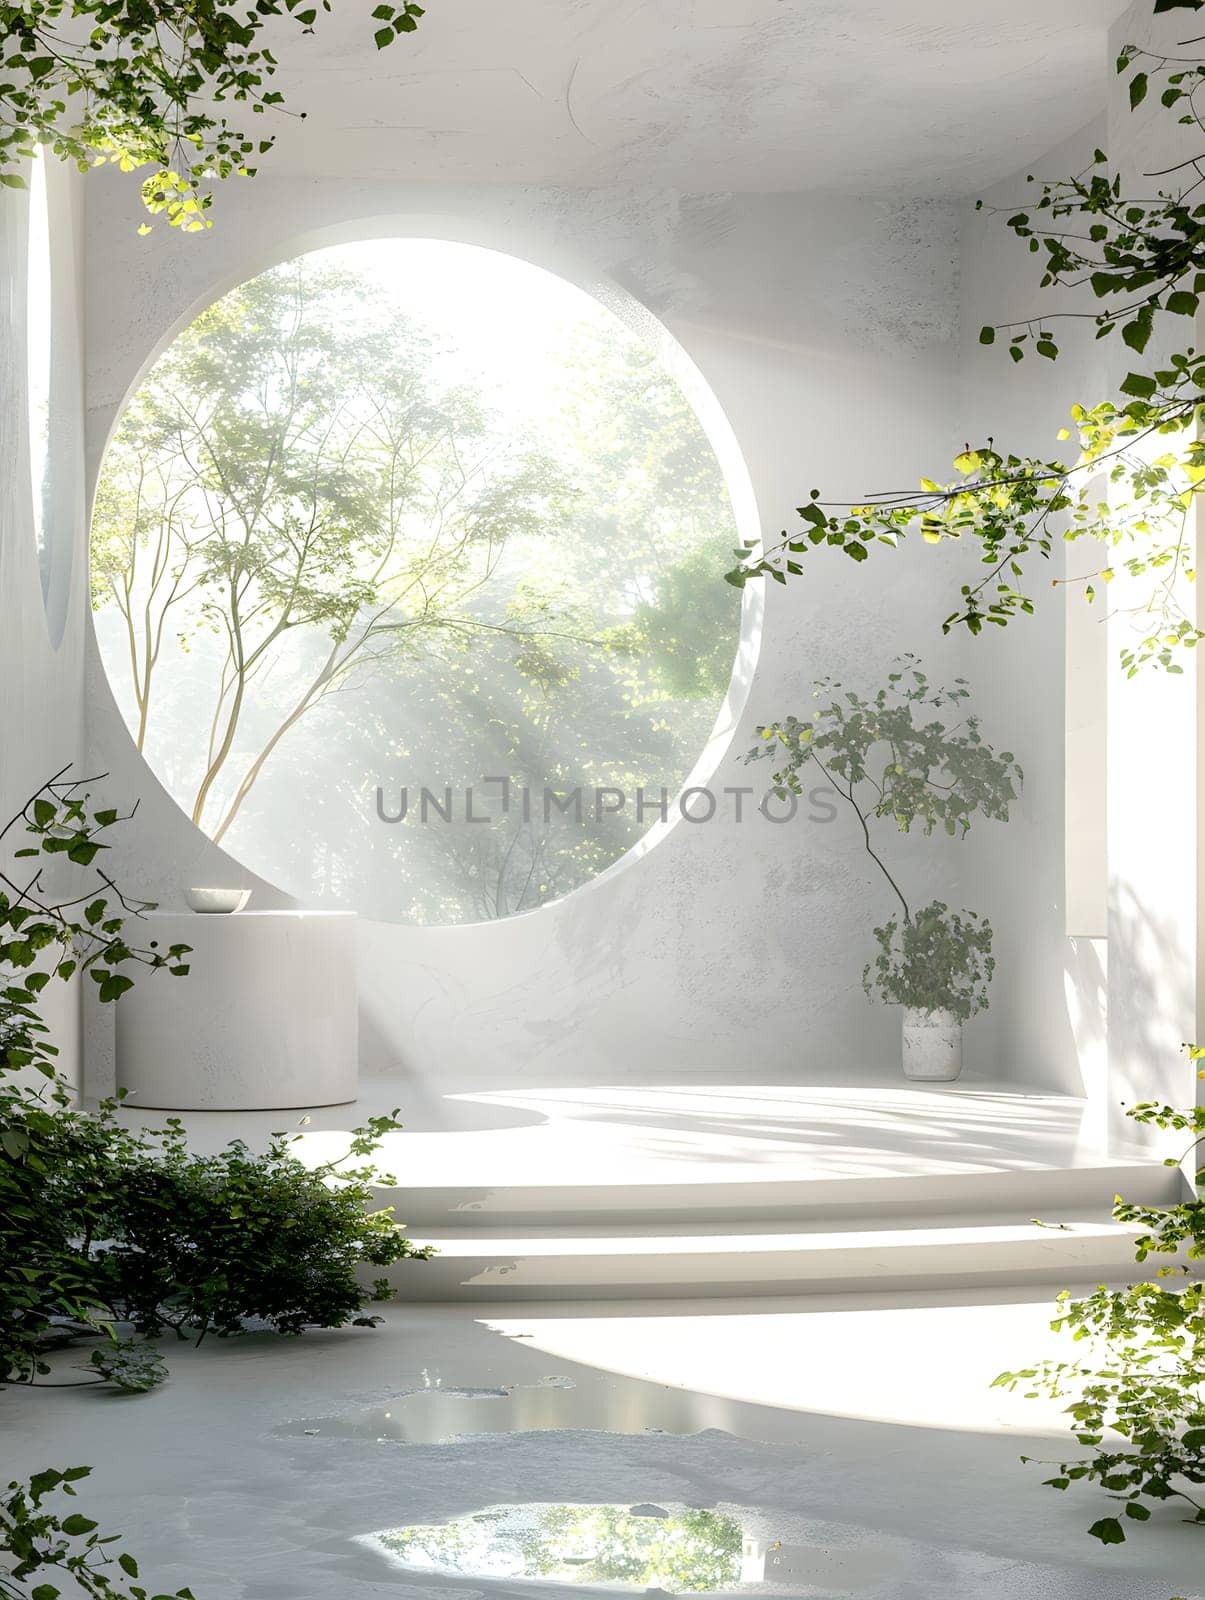 A circular window brings in sunlight to the room, overlooking natural landscape by Nadtochiy